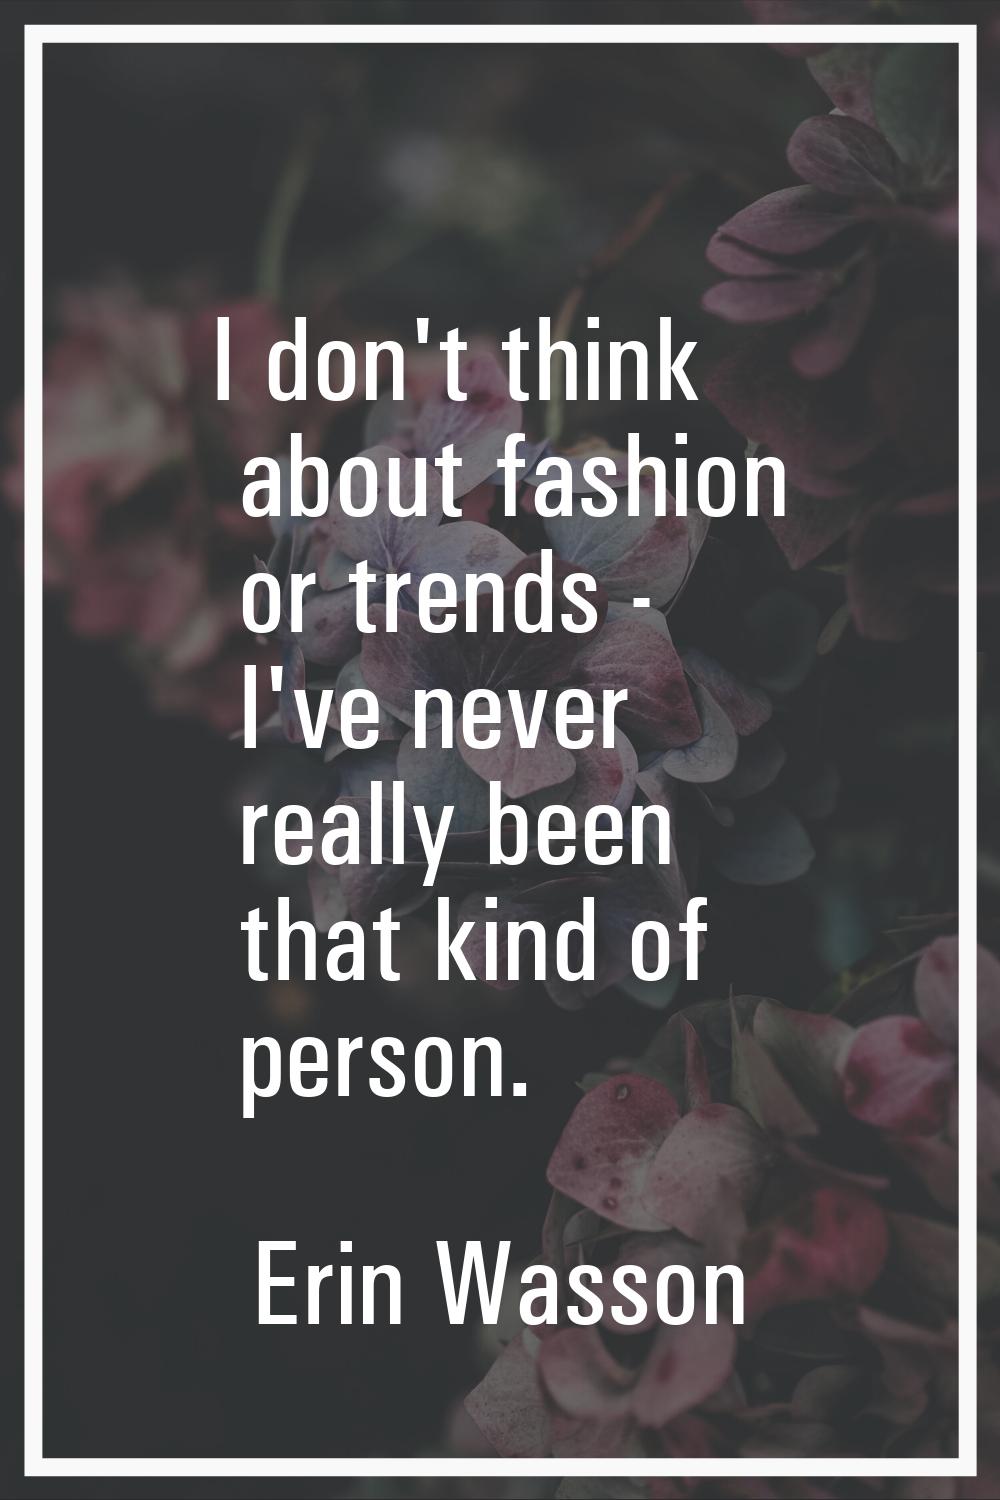 I don't think about fashion or trends - I've never really been that kind of person.